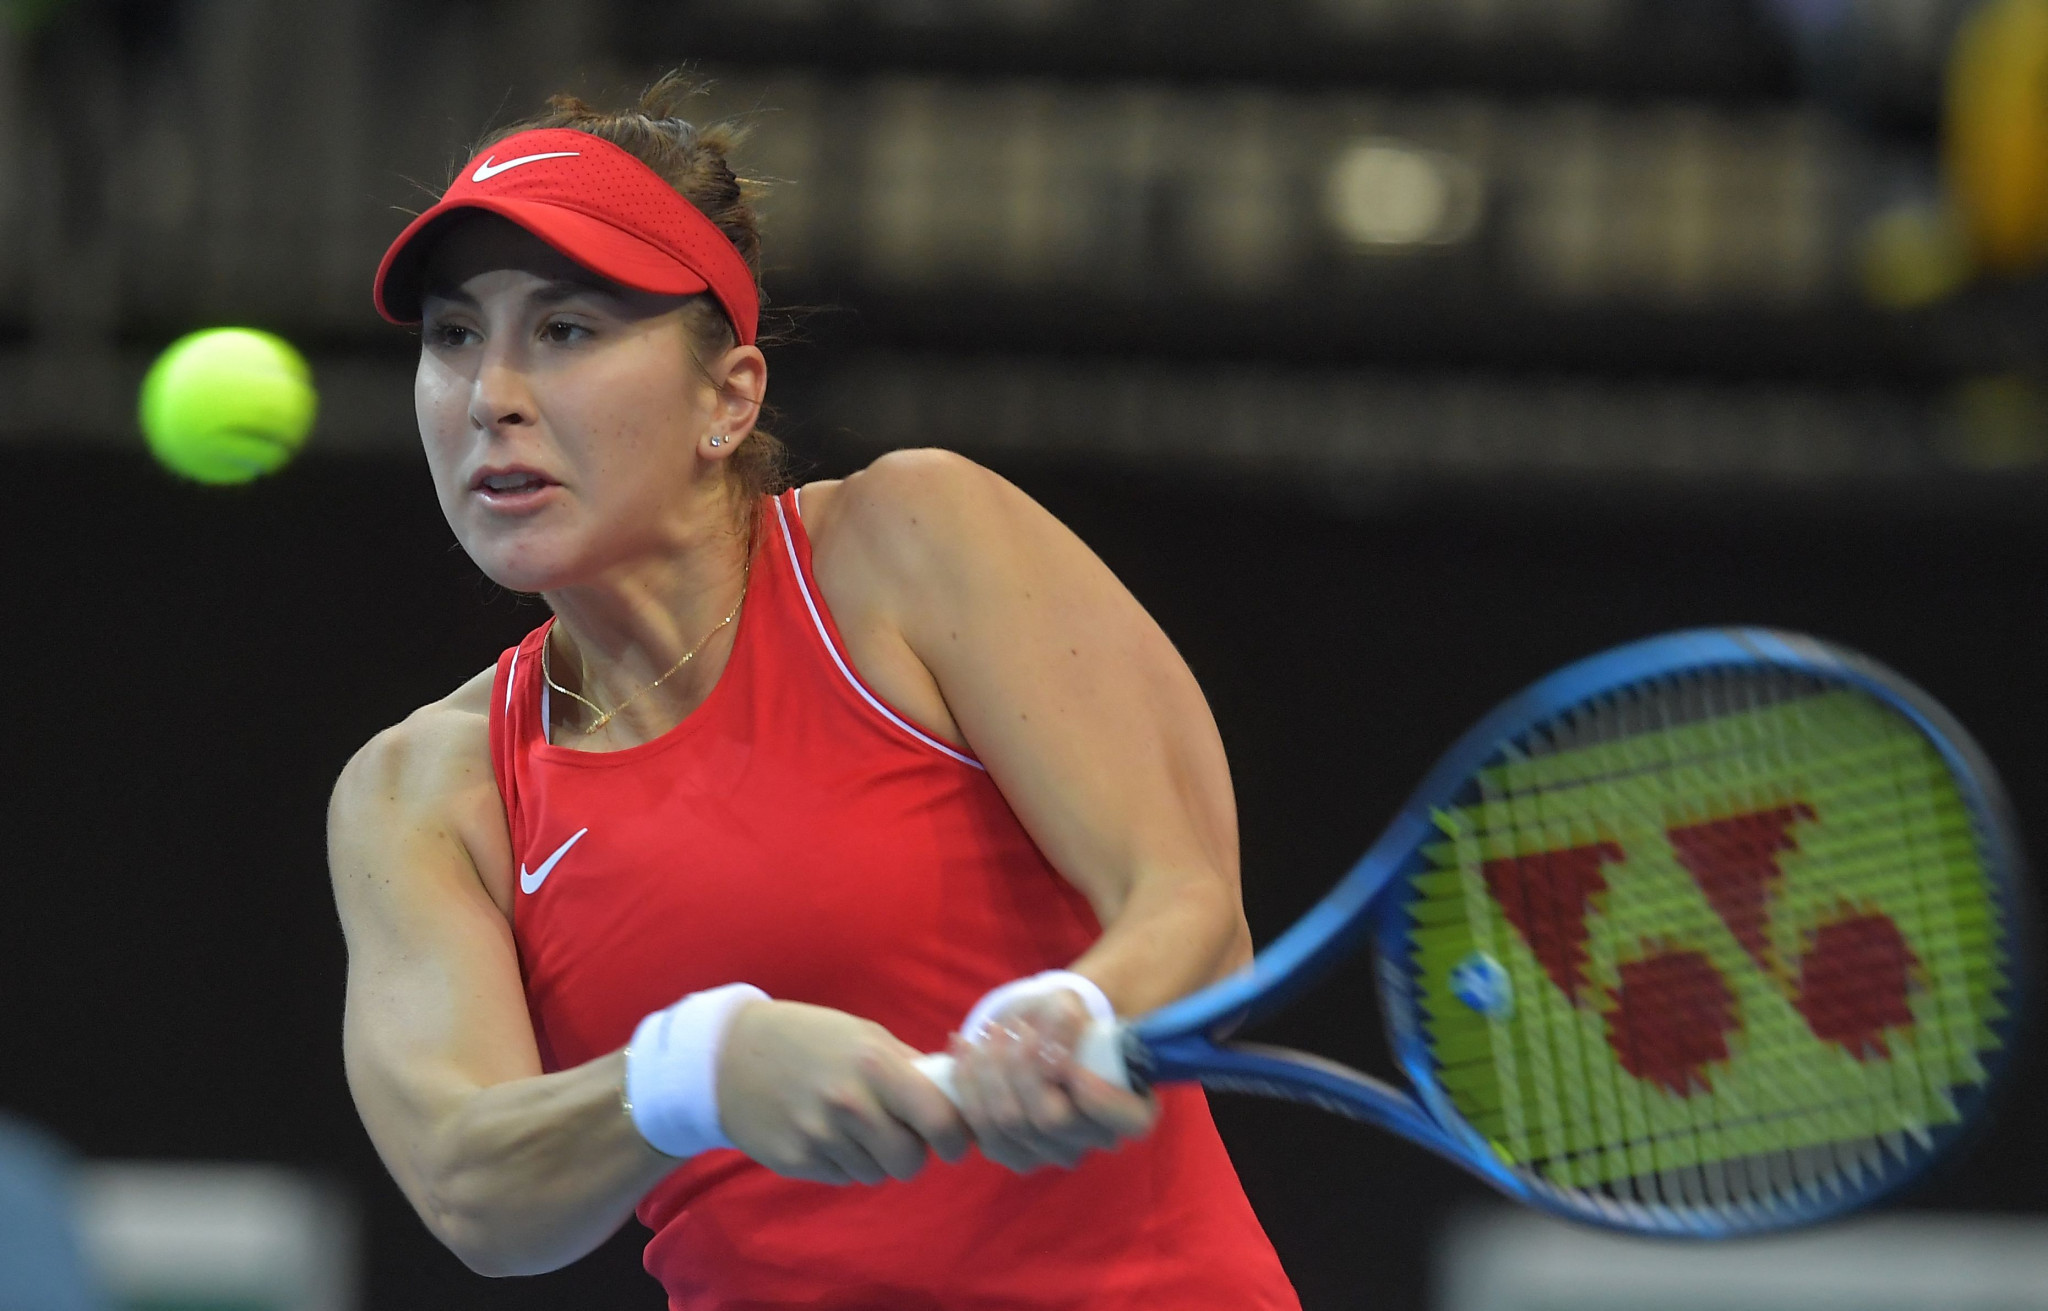 RTF and Switzerland progress to final after confident wins in Billie Jean King Cup